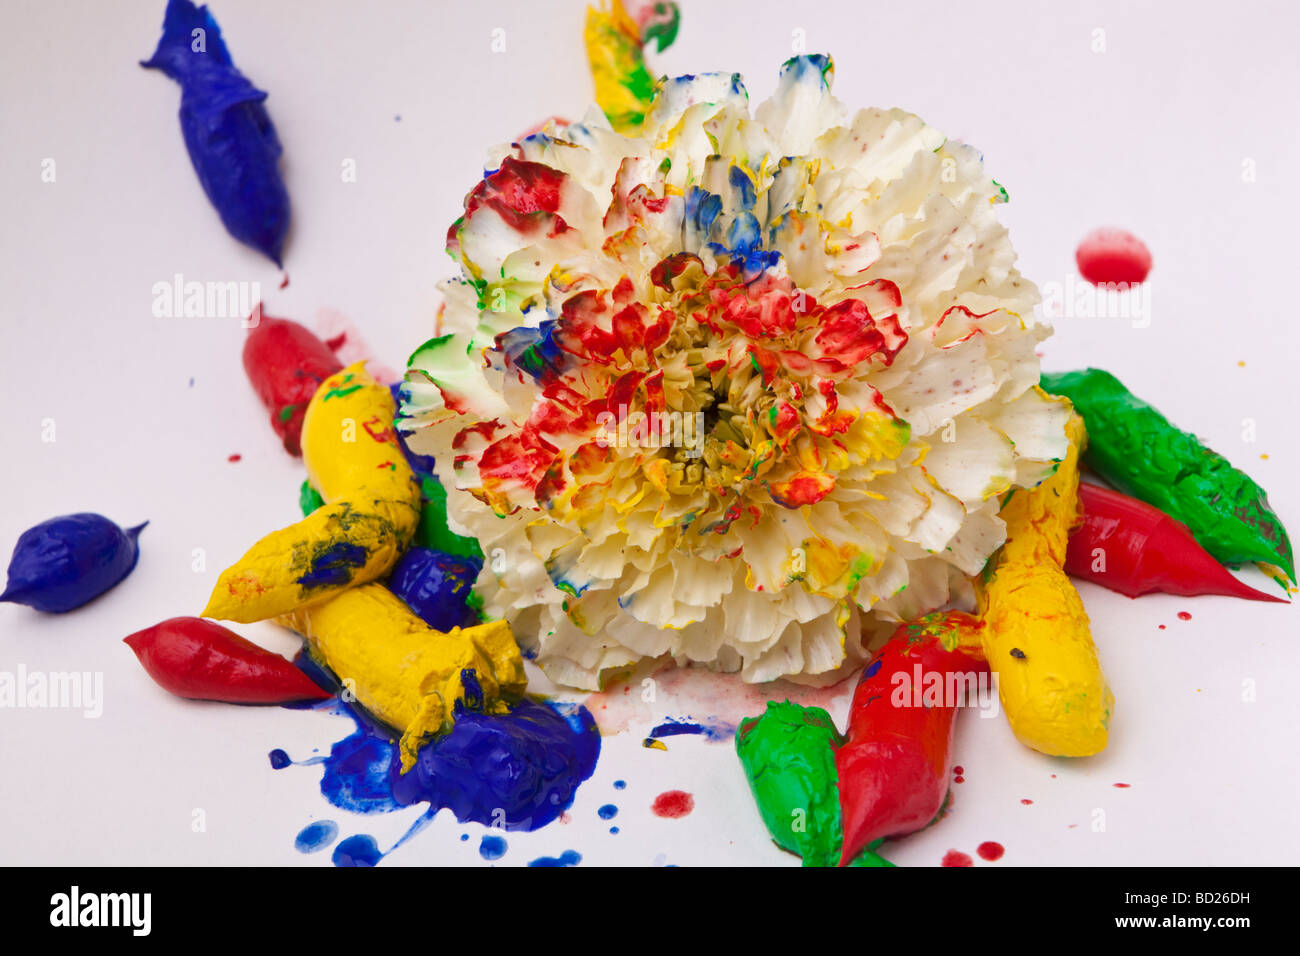 A simple white cut flower surrounded by paint with mixed paint on the petals Stock Photo